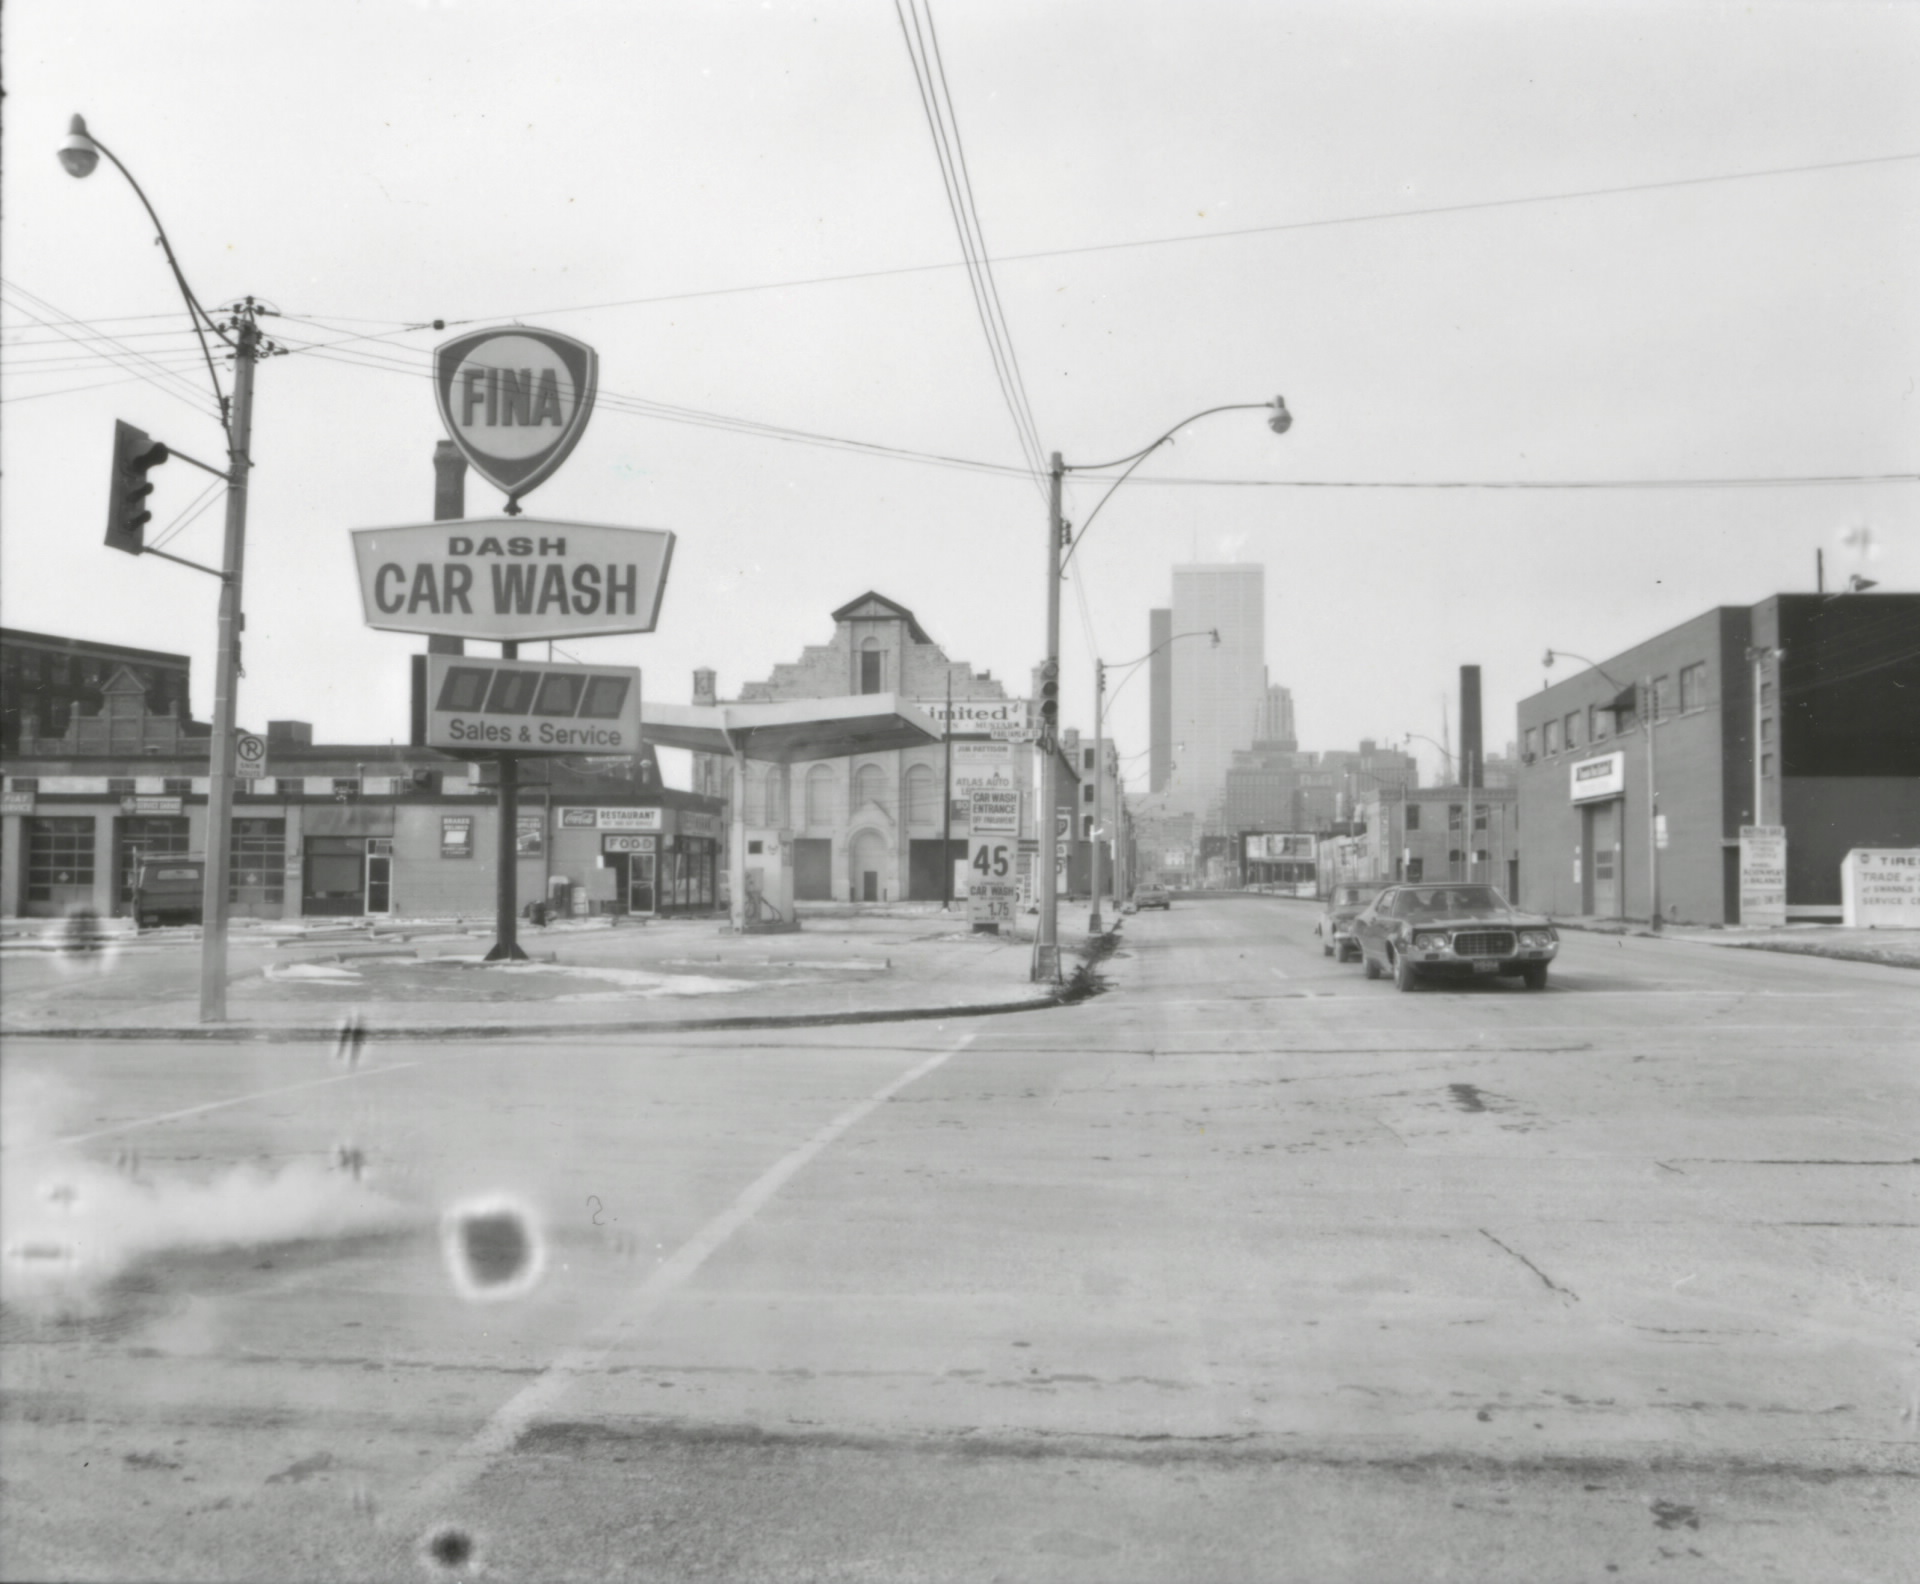 View of Front Street, looking west from Parliament Street, with a car wash and gas station in view on the left, cars on the street waiting at a light and downtown can be seen in the horizon.